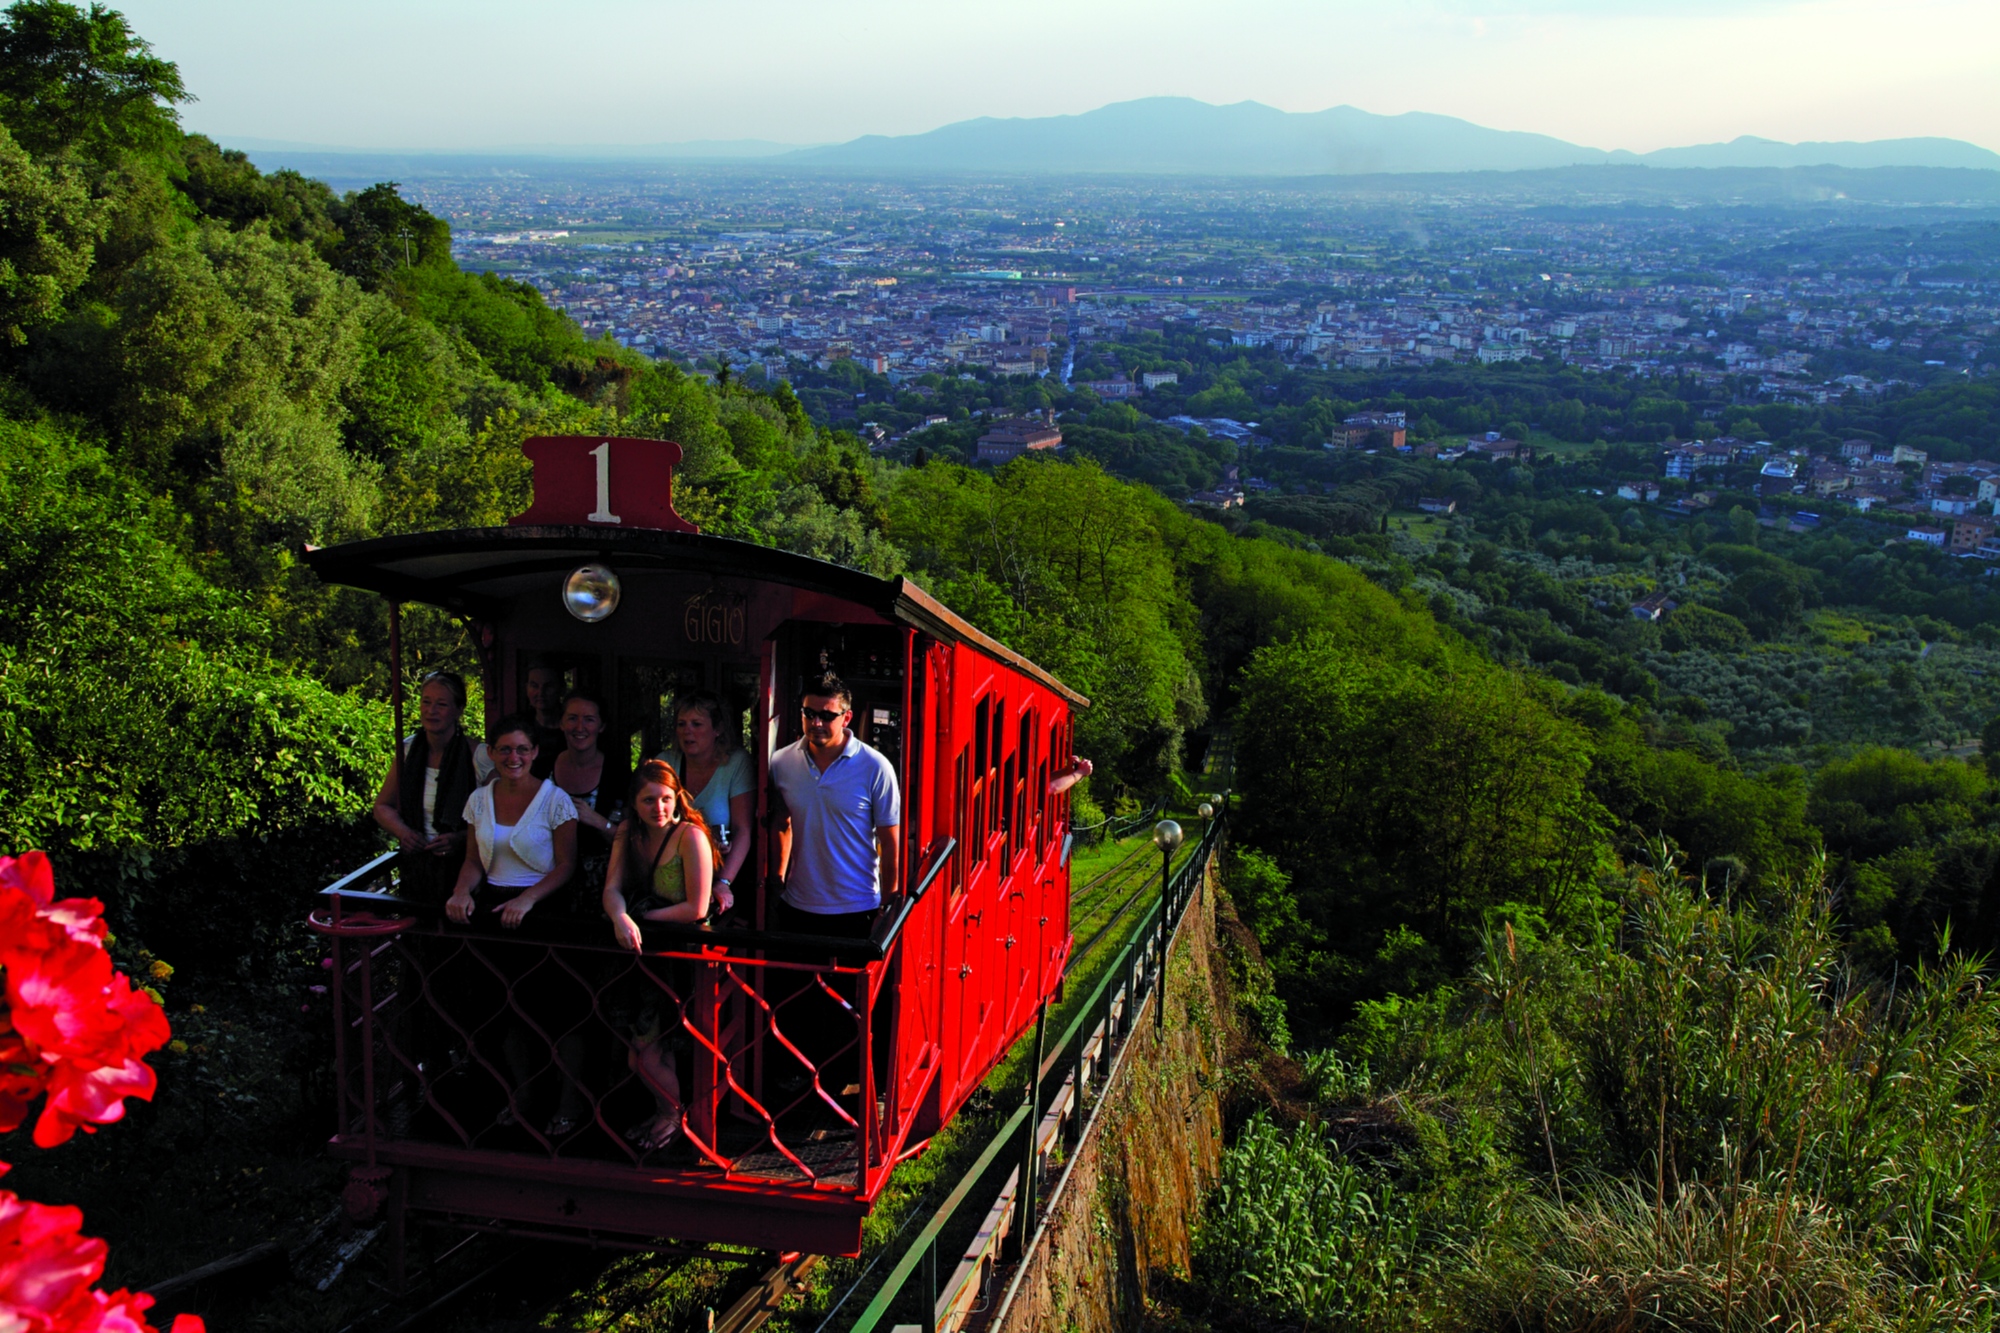 The funicular of Montecatini